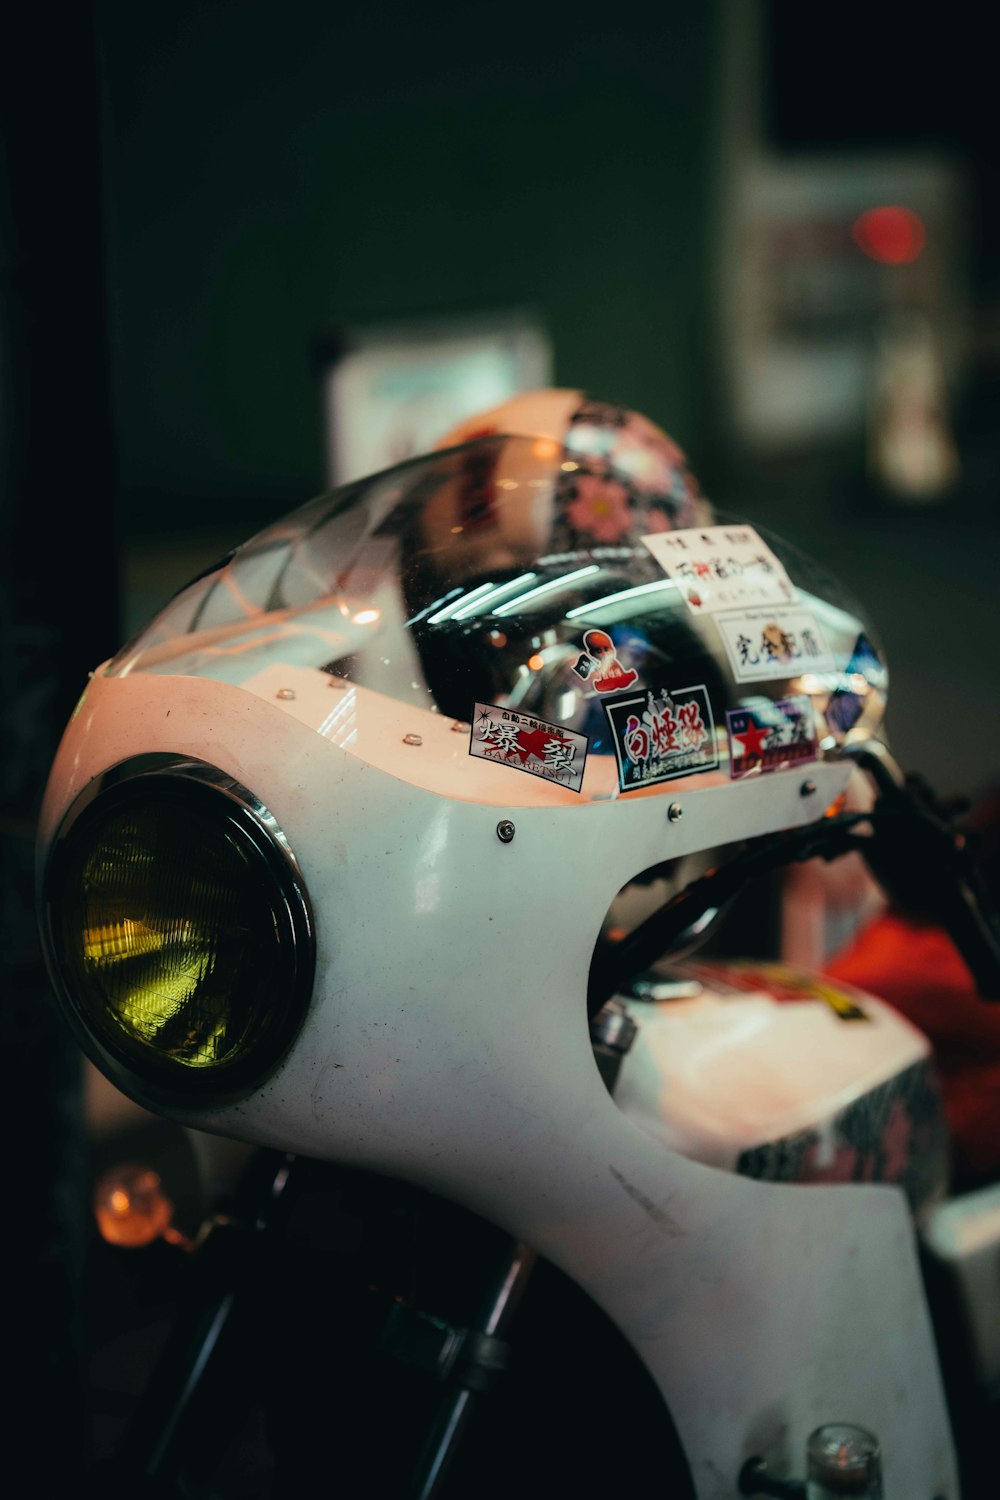 a close up of a motorcycle with a number of stickers on it